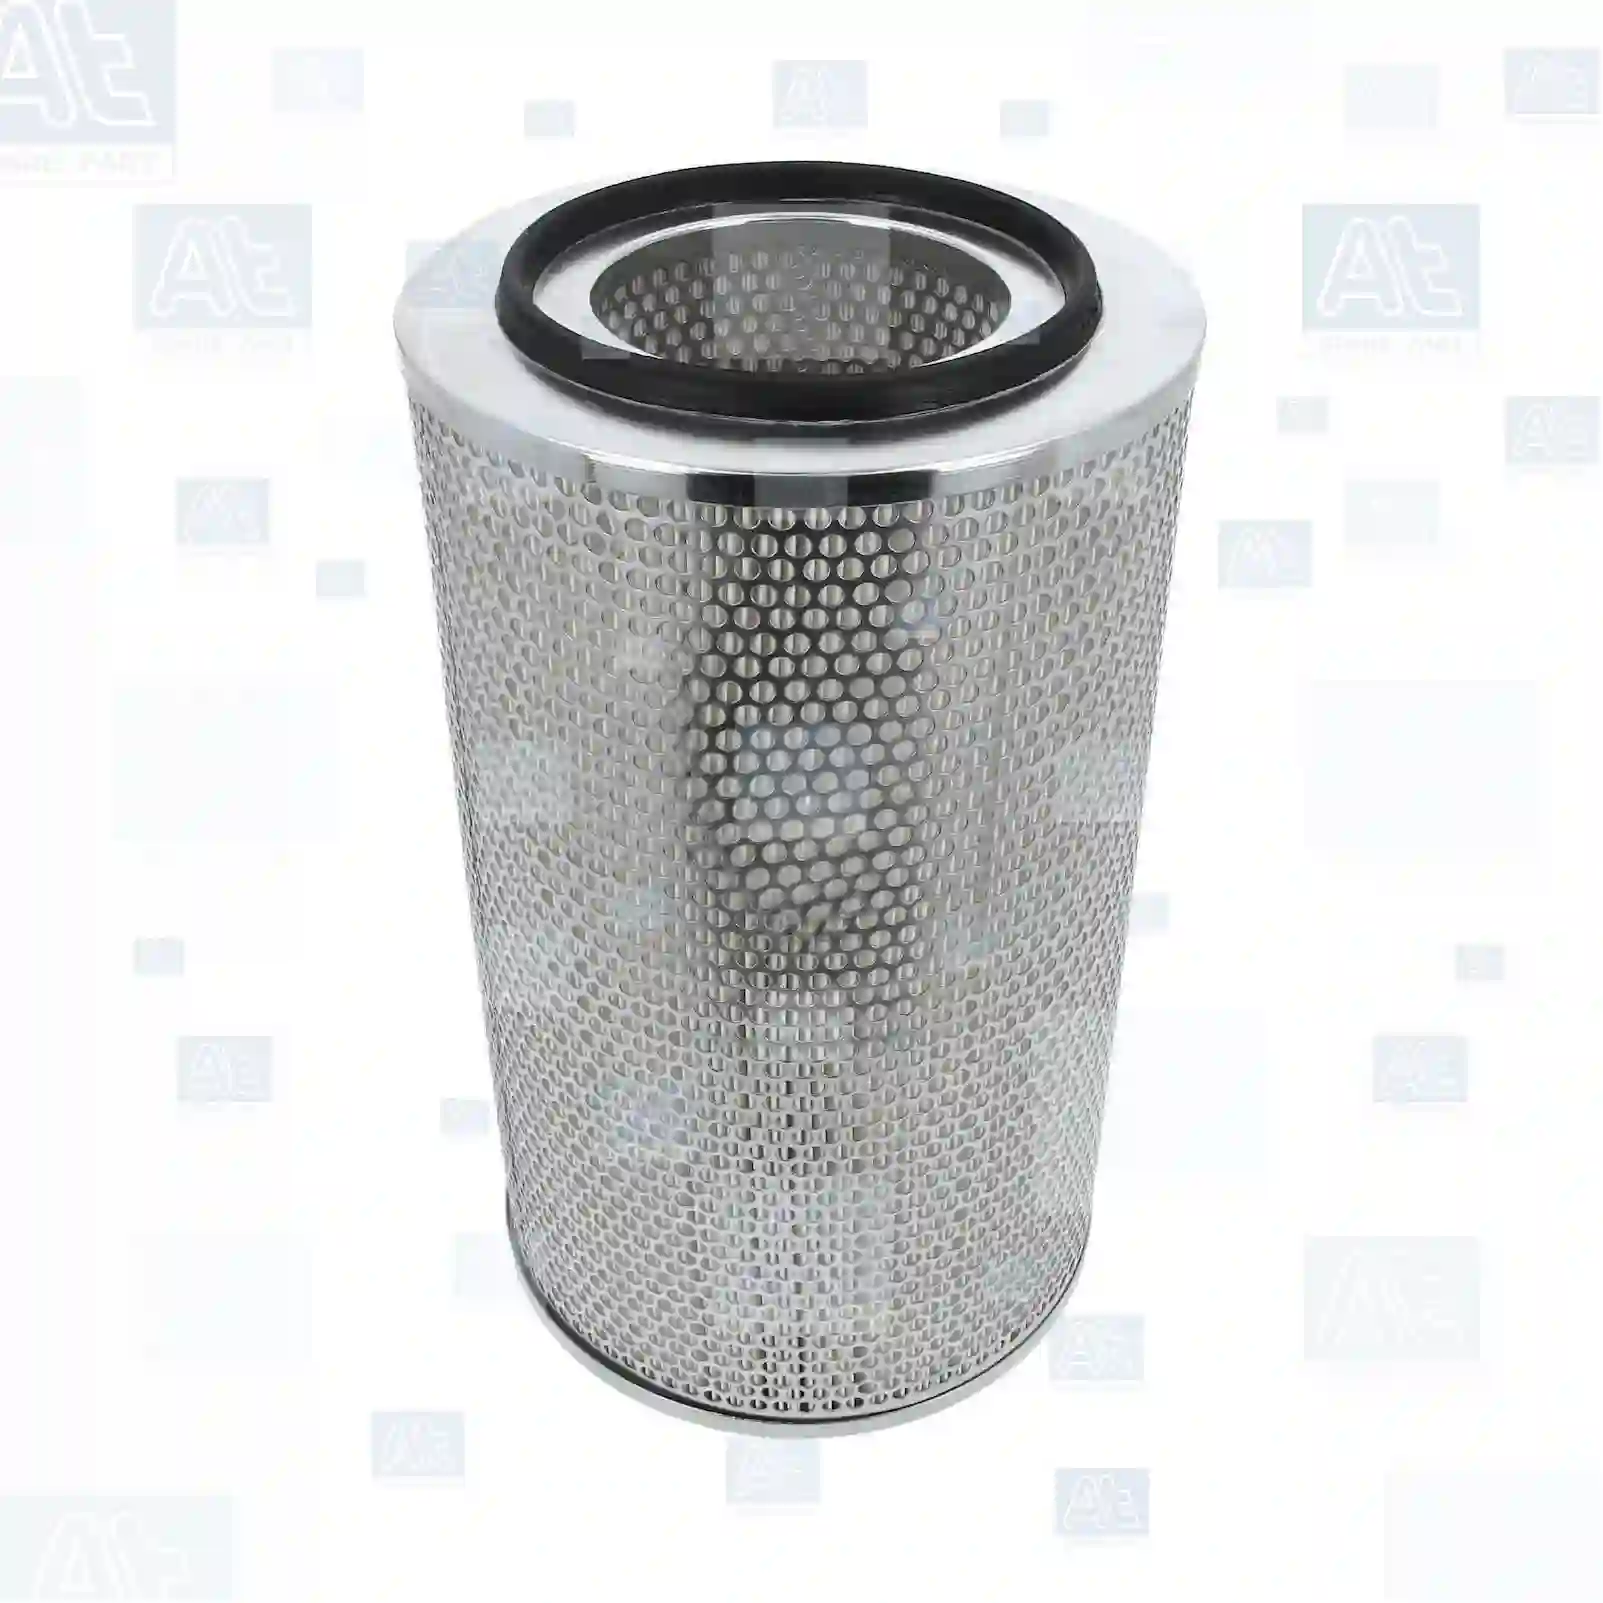  Air Filter Air filter, at no: 77706177 ,  oem no:2165054, 8009101128000, 3I-0835, 3I-0974, 10944704, 130941702, T0242503, T4212748, T4214314, T4214489, 0001770460, 0001770461, 0112294, 112094, 112294, 1500300, ABU8522, 00687774, 00746444, 074644, 0746444, 29504406, 432622, 43262200, 746444, 74644400, 988766, 98876600, 01902465, 02165041, 02165054, 02165074, 04002576, 09983763, 1210702033400, 8009101128000, 632114, 1318695, 1210702033400, 0746444, 1416433, 1470702, 4134406, 9746444, F385202090010, 00824847, 01186389, 01902046, 01902048, 01902465, 02165041, 02165054, 02165074, 07140555, 08323032, 08323285, 08323286, 08323287, 08323288, 09983763, 75248729, Y03727603, Y05776000, 5011325, 5011556, 5018033, 824847, 9974141, 25096250, 9974141, 2165054, 00632114, 01186389, 01902048, 01902465, 02165054, 02165074, 02165076, 08323032, 08323285, 08323286, 08323287, 08323288, 1186389, 1902048, 1902465, 2165054, 500024503, 75248729, 8323032, 8323285, 8323287, 8323288, AZ26091, 34000460, 02165054, 02165074, 09983763, 02165054, 5106188, 5106534, 5601964, 2191771508, 2191P771508, 04544054104, 04544055104, 04544092304, 04544092664, 81083040036, 81083040045, 81083040064, 82083040036, 85000015182, 85000015277, 0001094474, 0010944704, 0010947404, 0010948904, 0020946204, 0040940904, 0130941702, 3450847304, 3450947304, 020315400, 00824847, 80913927, 87682981, 16546-D9200, 632114, 99000190075, 99000190702, 99012190701, 0002214489, 0003563595, 0004212748, 0004214189, 0004214314, 0004214489, 0022004800, 0500242503, 5000242503, 5000283088, 5000286773, 5000783932, 5001834750, 5010094144, 6005019662, 7485129567, R9601, ABU8522, 4631072000, 4631072020, 235586, 8315085102, 8319085102, 99000190075, 99000190702, 99012190701, 5501660684, 16546D9200, 805044, 80504400, 80504410, 601200960, 631204401, 12705260, CH12242, 6644990, 66449901, 6644991, 664990, 79359626, T15129620, ZG00825-0008 At Spare Part | Engine, Accelerator Pedal, Camshaft, Connecting Rod, Crankcase, Crankshaft, Cylinder Head, Engine Suspension Mountings, Exhaust Manifold, Exhaust Gas Recirculation, Filter Kits, Flywheel Housing, General Overhaul Kits, Engine, Intake Manifold, Oil Cleaner, Oil Cooler, Oil Filter, Oil Pump, Oil Sump, Piston & Liner, Sensor & Switch, Timing Case, Turbocharger, Cooling System, Belt Tensioner, Coolant Filter, Coolant Pipe, Corrosion Prevention Agent, Drive, Expansion Tank, Fan, Intercooler, Monitors & Gauges, Radiator, Thermostat, V-Belt / Timing belt, Water Pump, Fuel System, Electronical Injector Unit, Feed Pump, Fuel Filter, cpl., Fuel Gauge Sender,  Fuel Line, Fuel Pump, Fuel Tank, Injection Line Kit, Injection Pump, Exhaust System, Clutch & Pedal, Gearbox, Propeller Shaft, Axles, Brake System, Hubs & Wheels, Suspension, Leaf Spring, Universal Parts / Accessories, Steering, Electrical System, Cabin